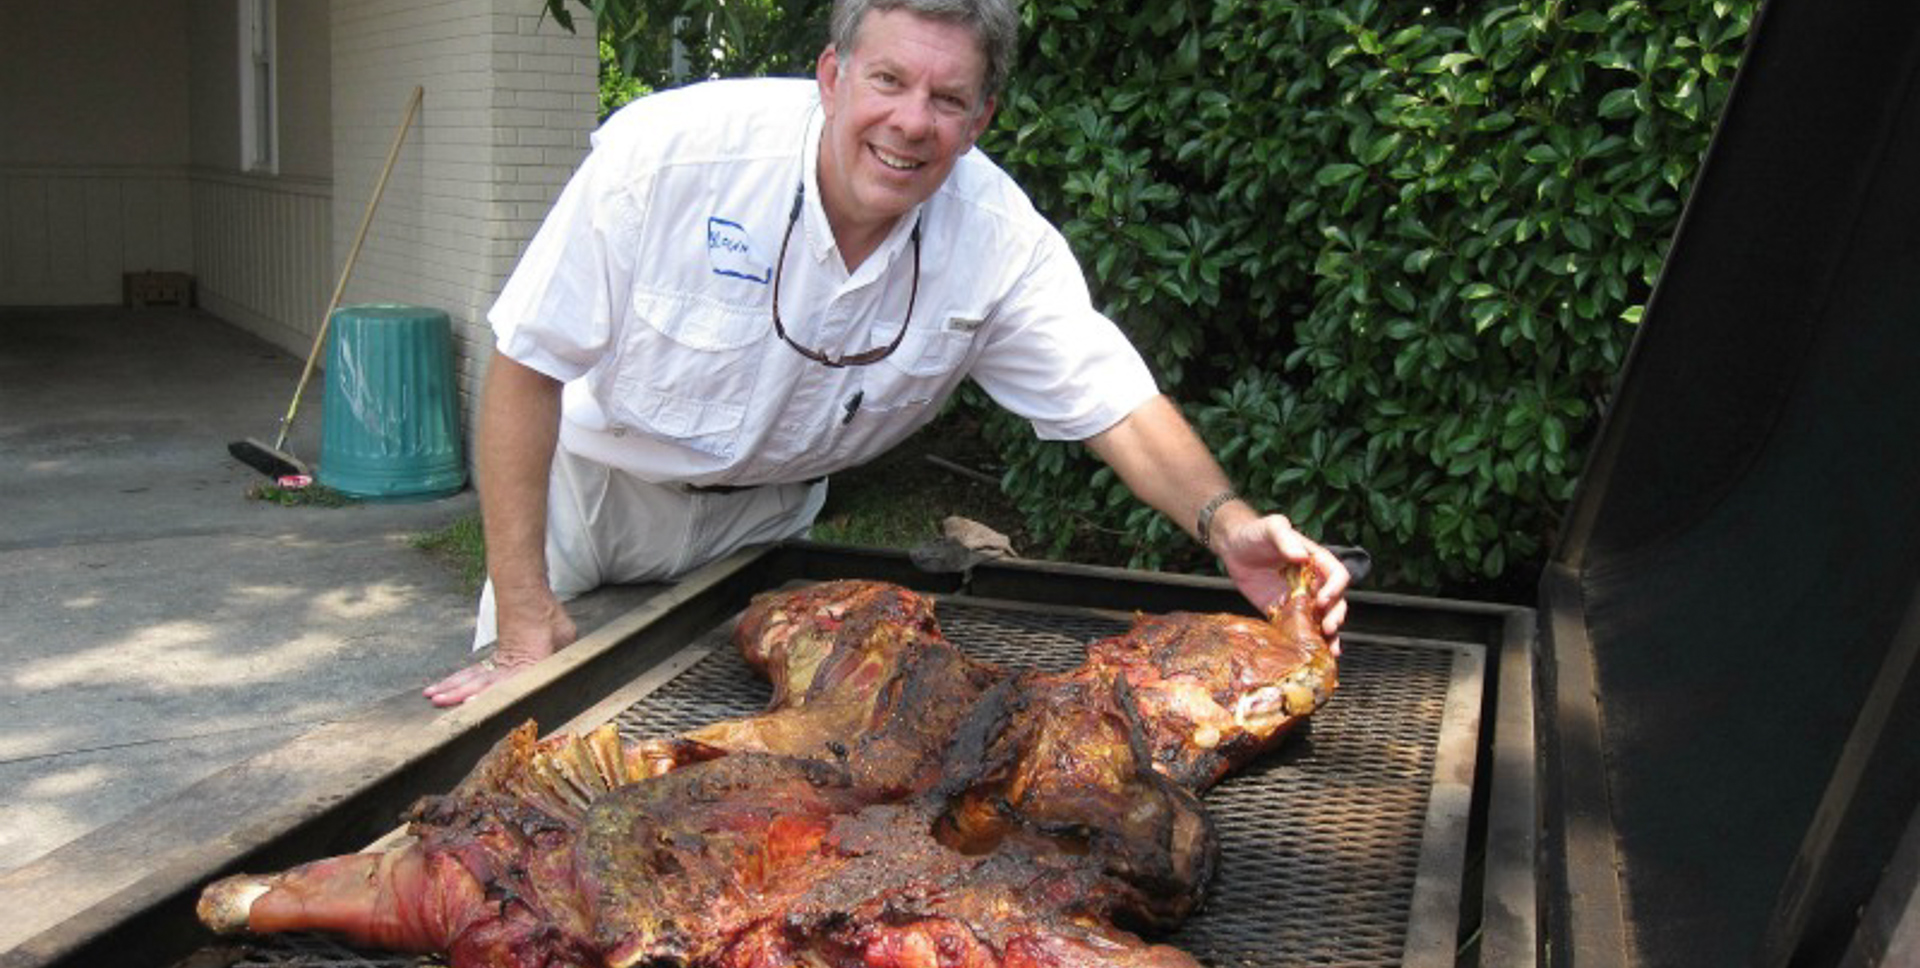 A roasted pig carcass with a person touching it.